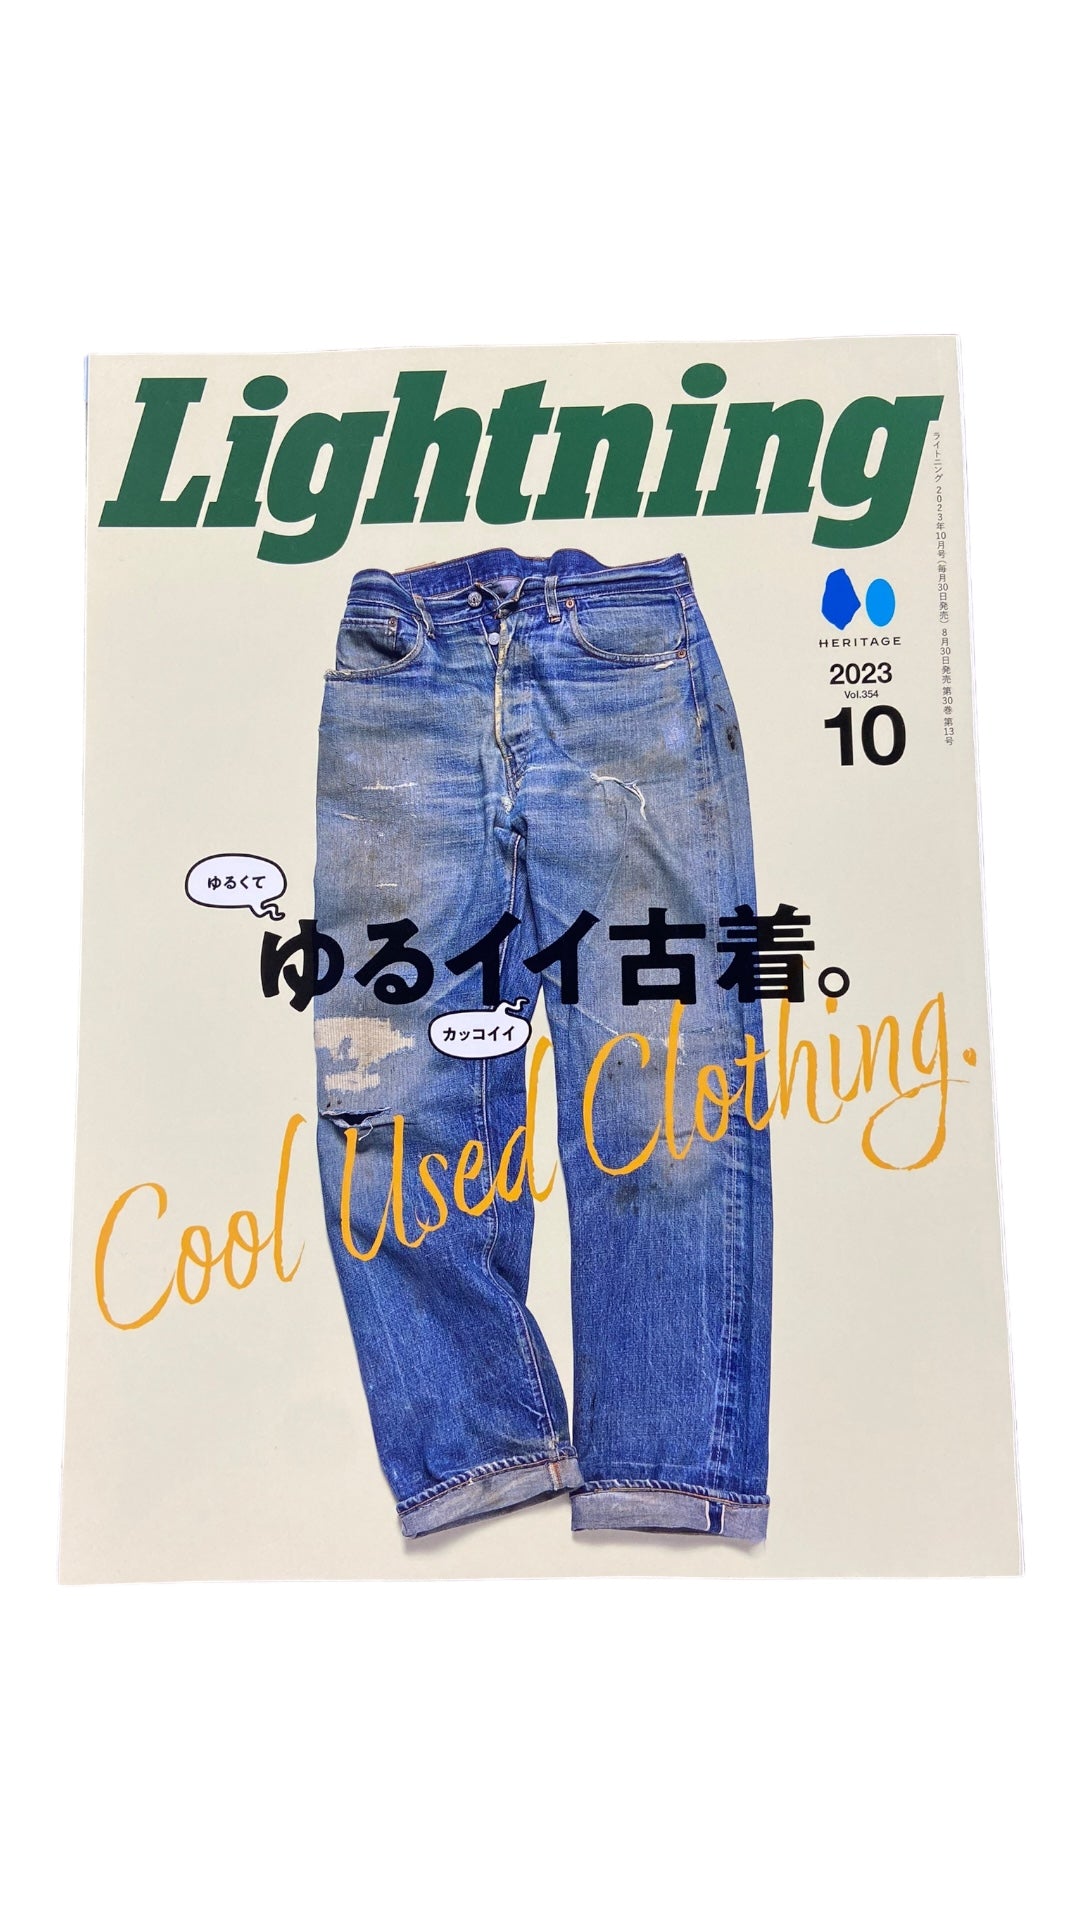 Lightning Vol 354 (2023.10) Cool Used Clothing Coffee Table Book